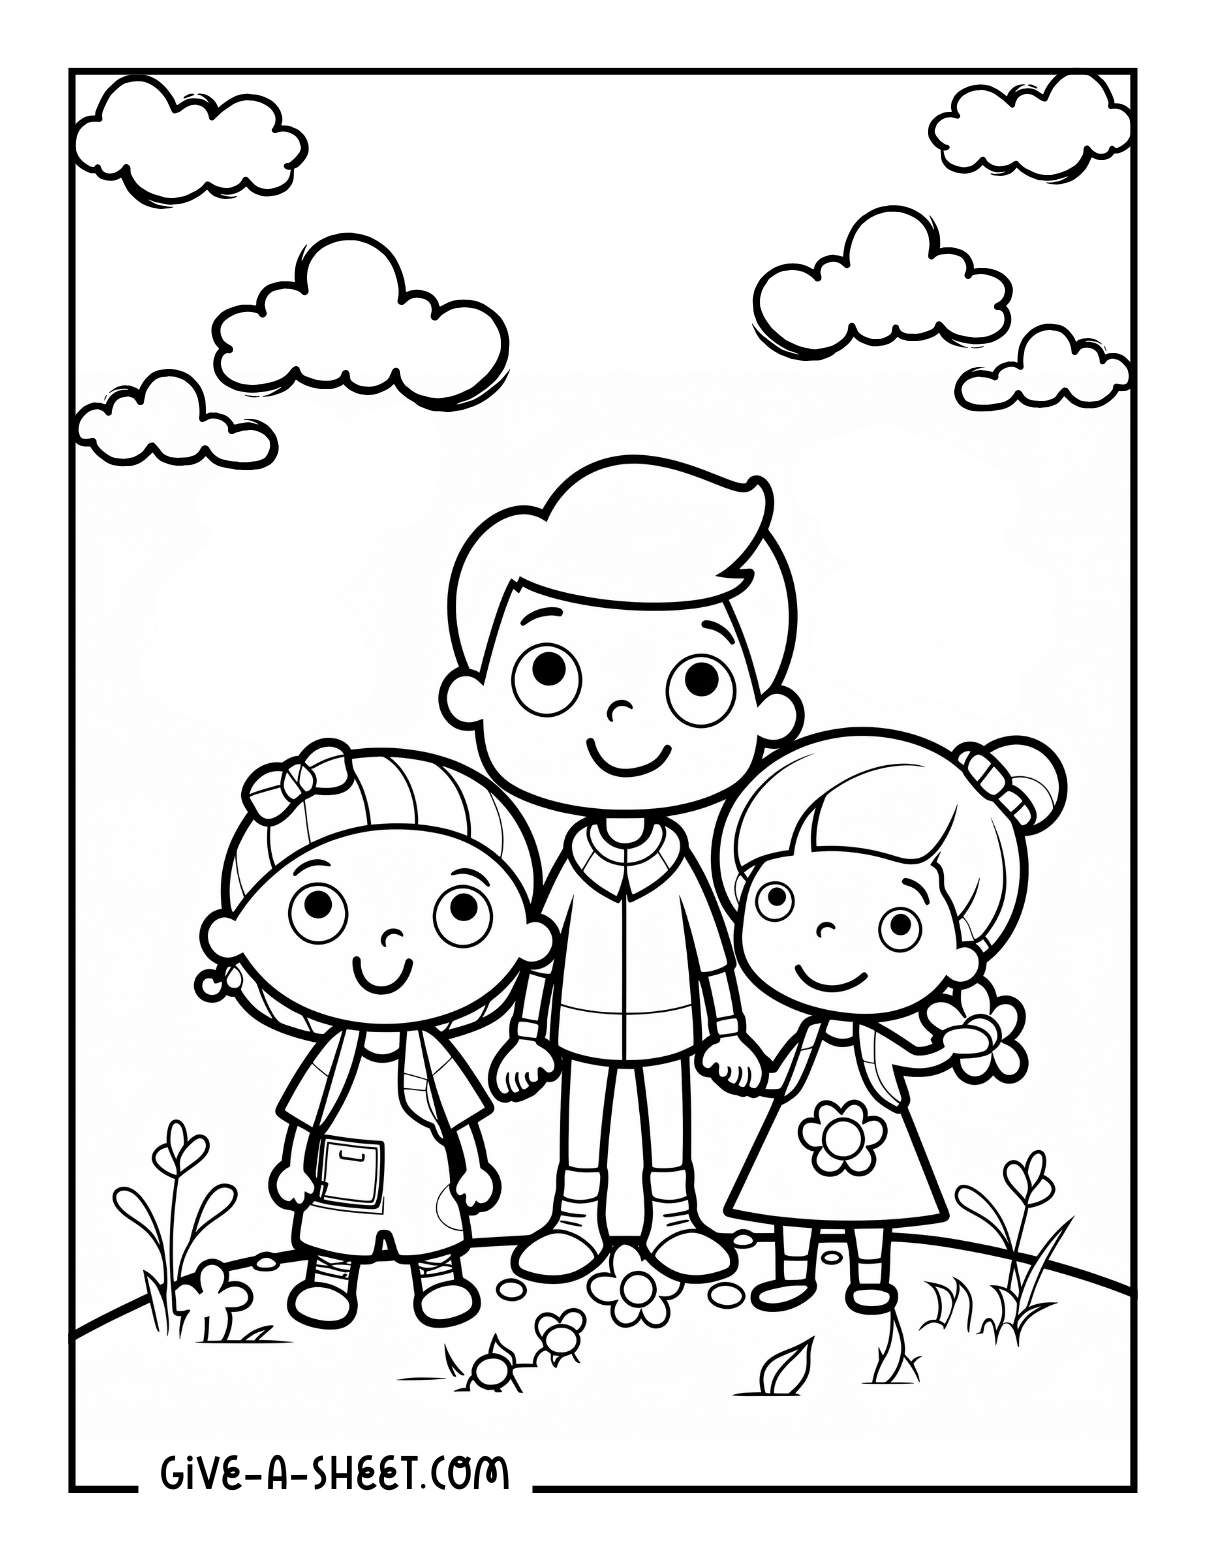 Quality time for 3 bff coloring page for kids.